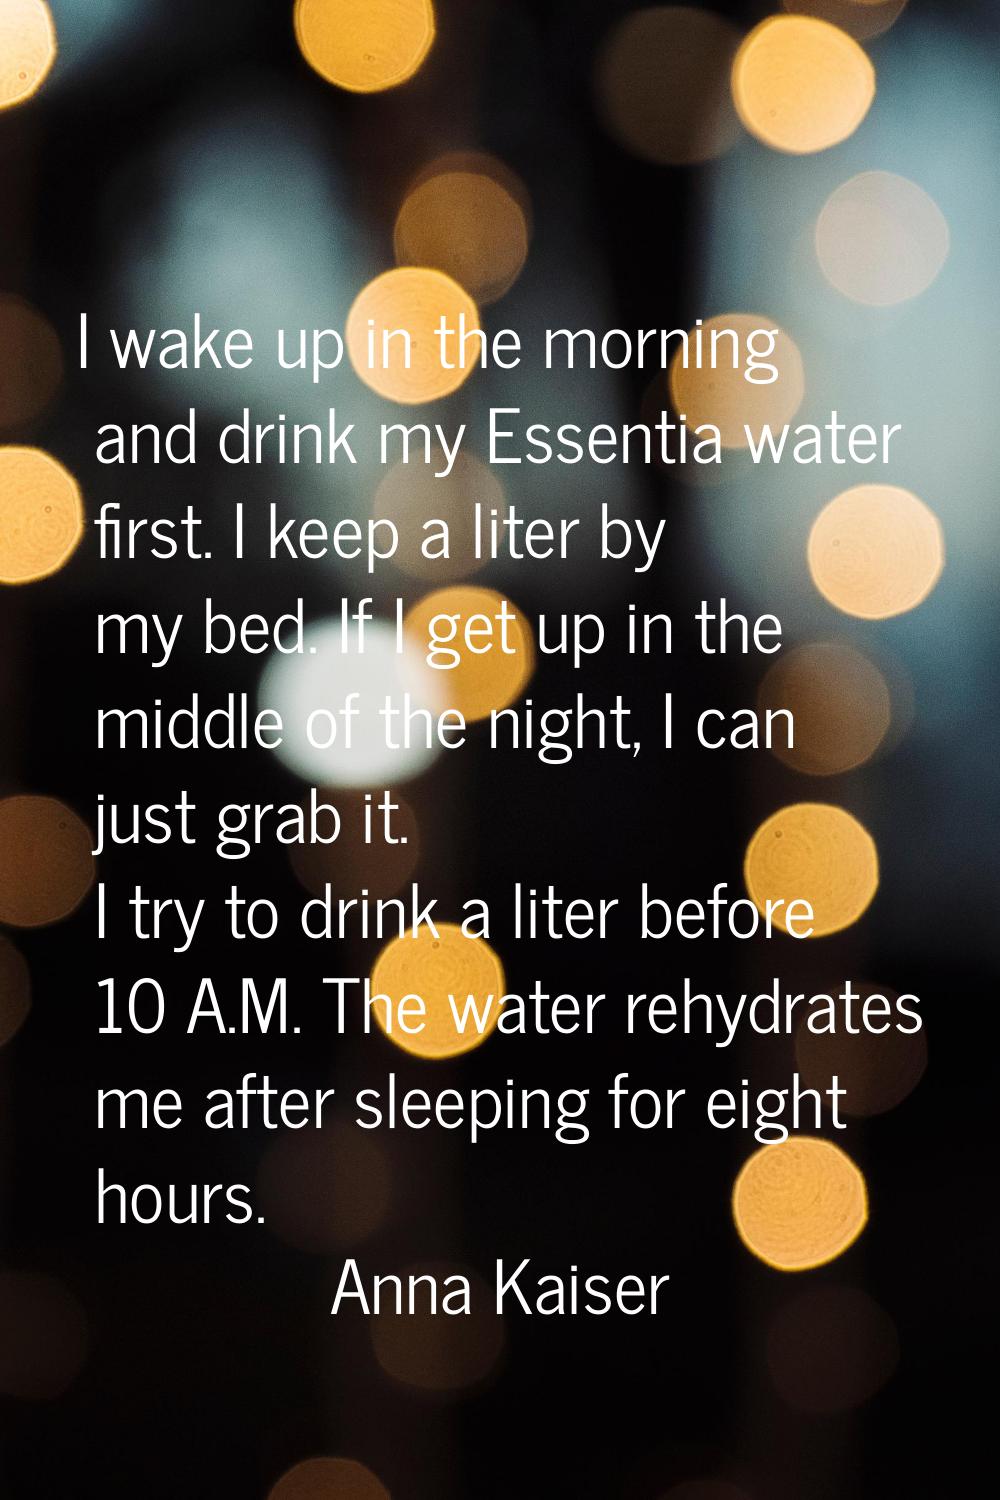 I wake up in the morning and drink my Essentia water first. I keep a liter by my bed. If I get up i